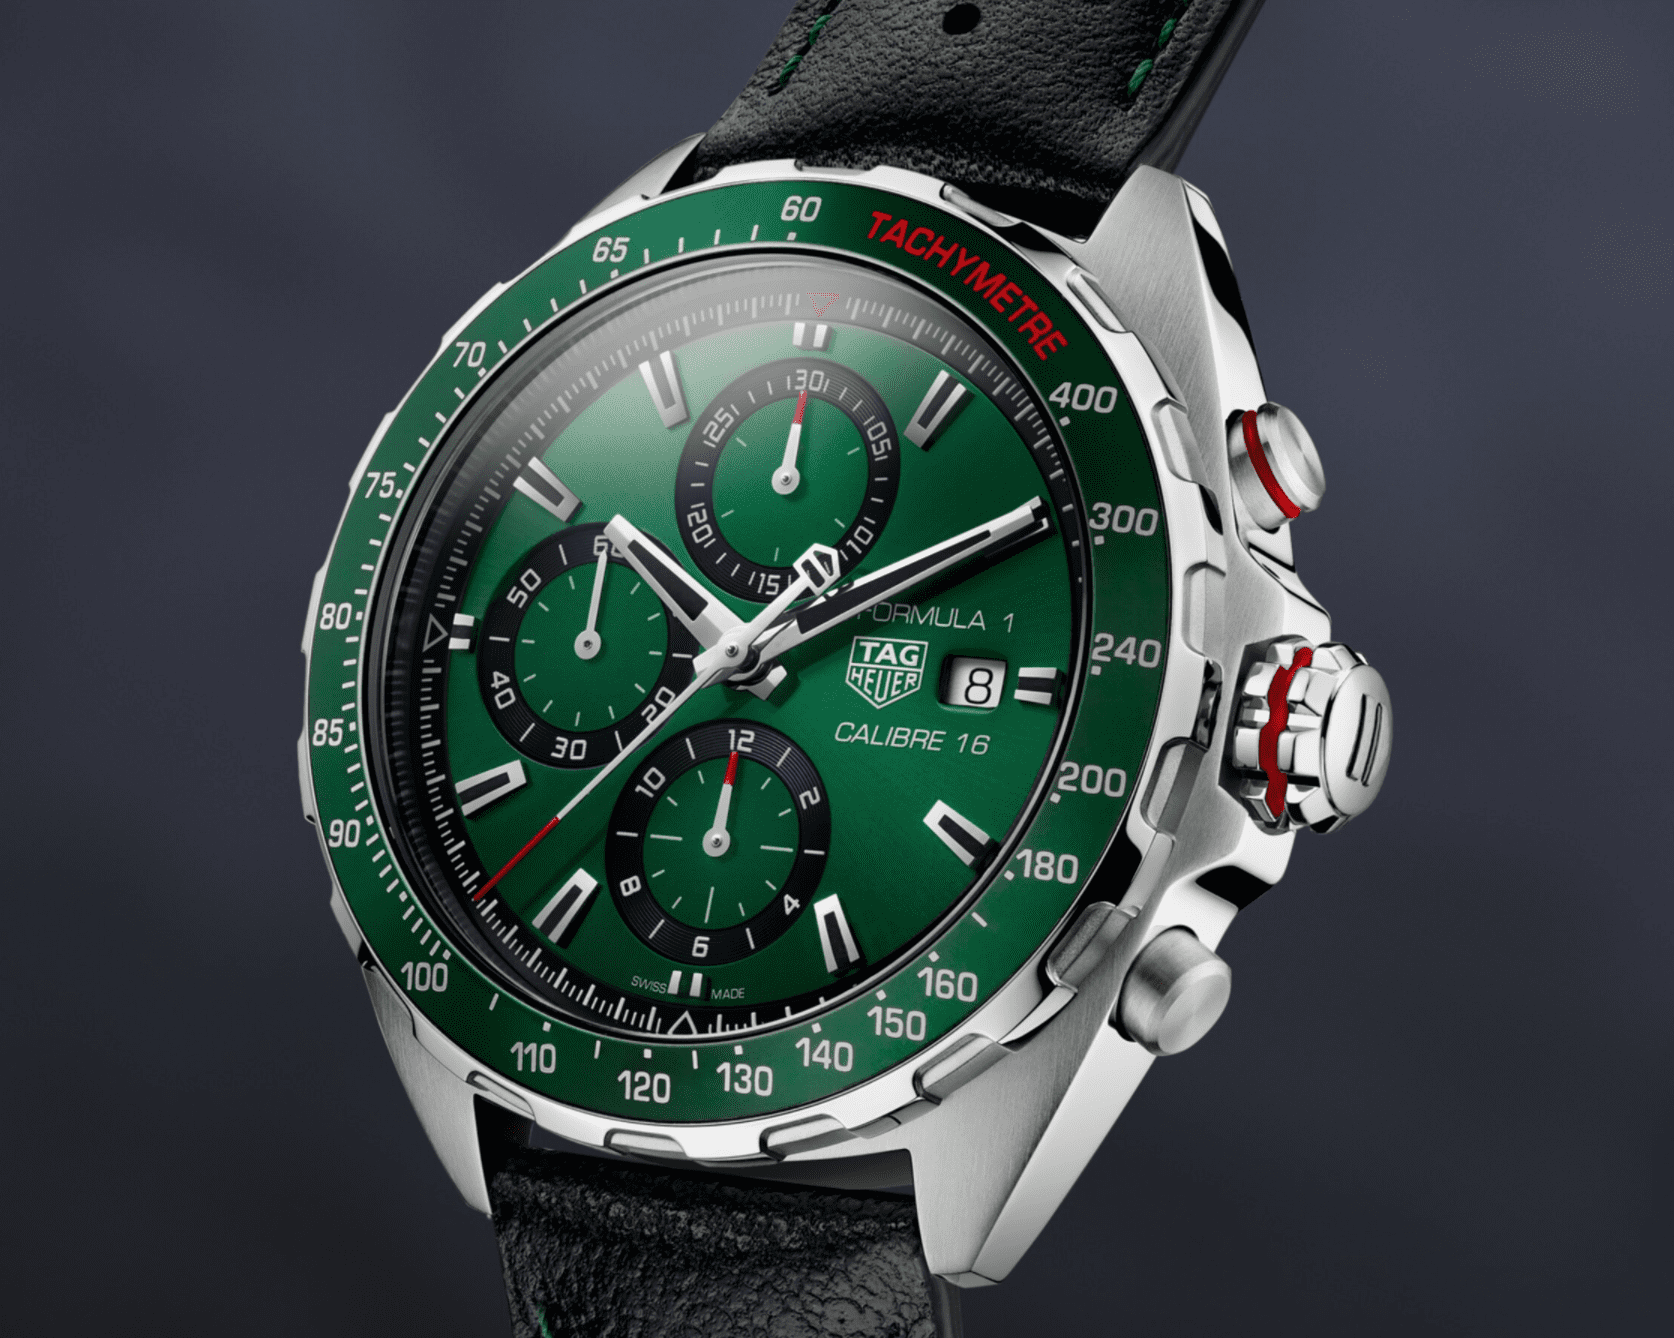 INTRODUCING: The TAG Heuer Formula 1 Racing Green is a gleaming green engine for the wrist